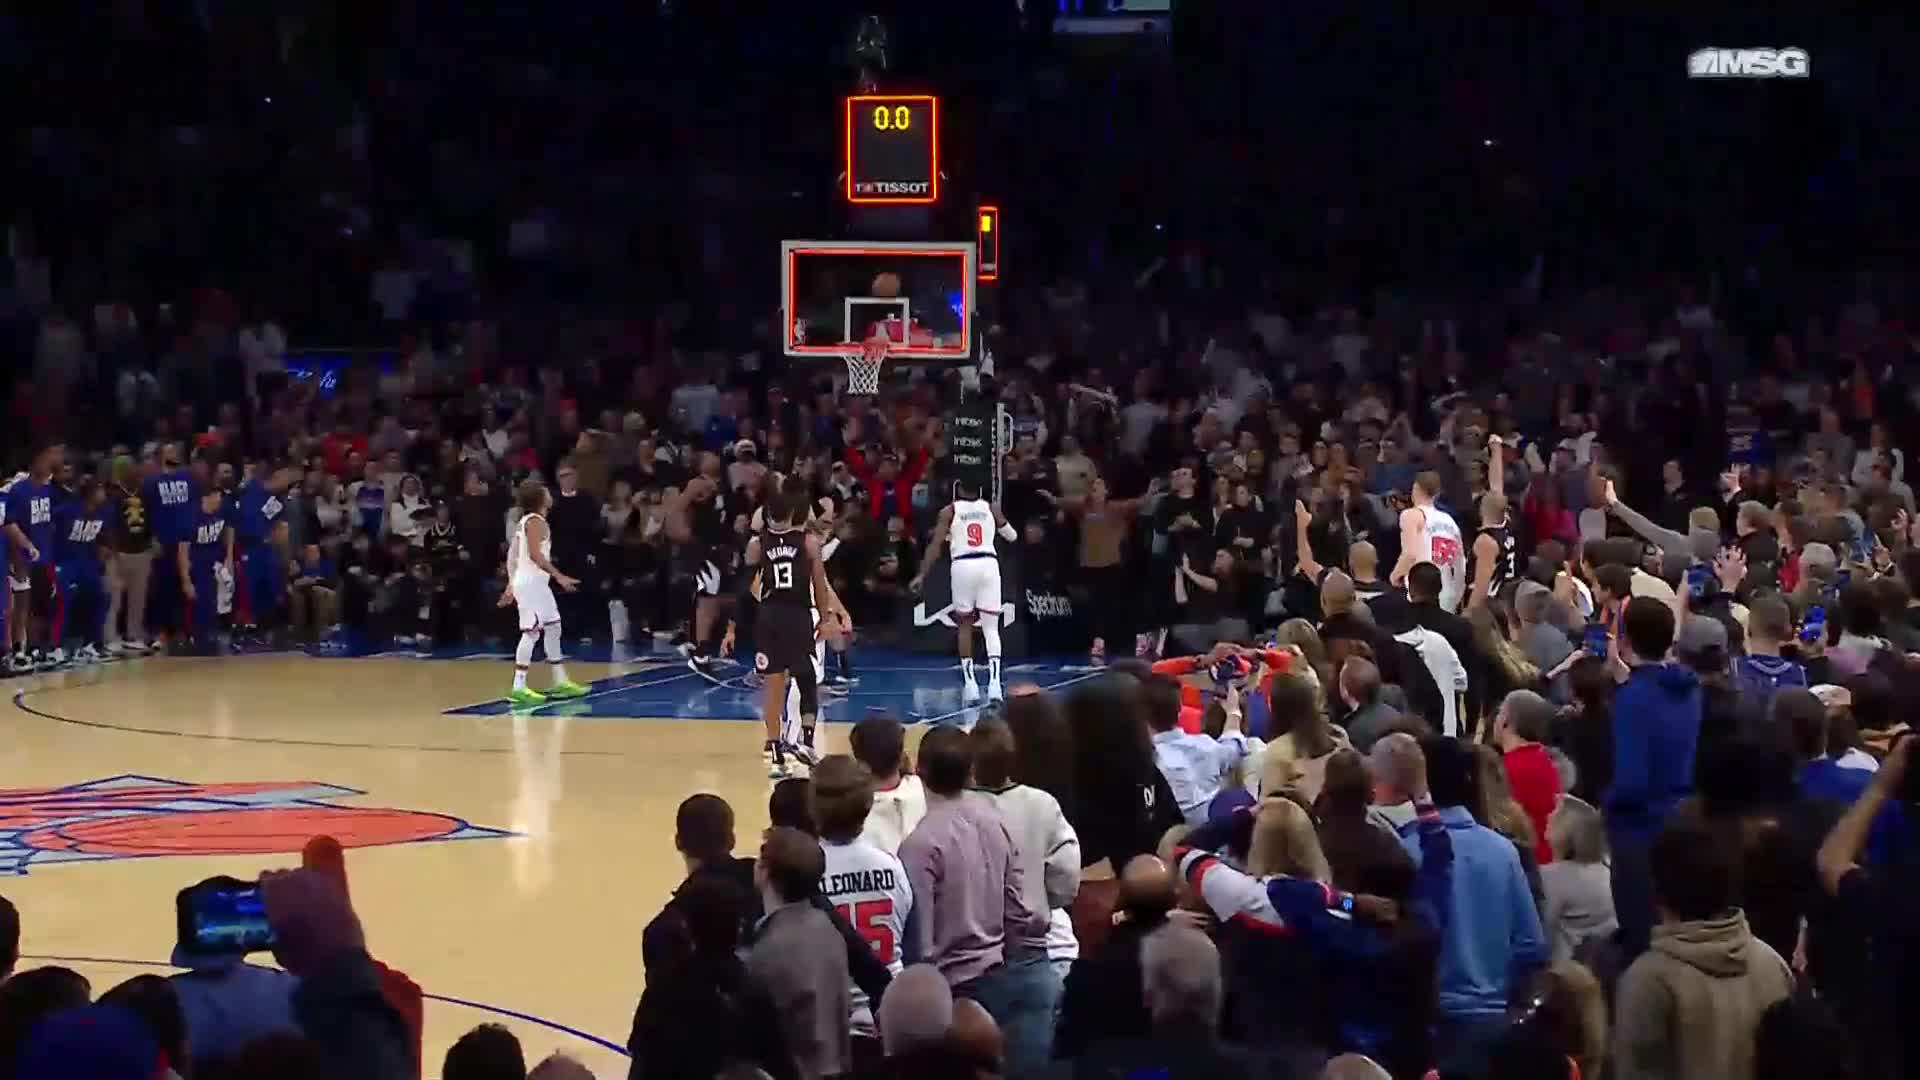 Nicolas Batum with the must-see play!